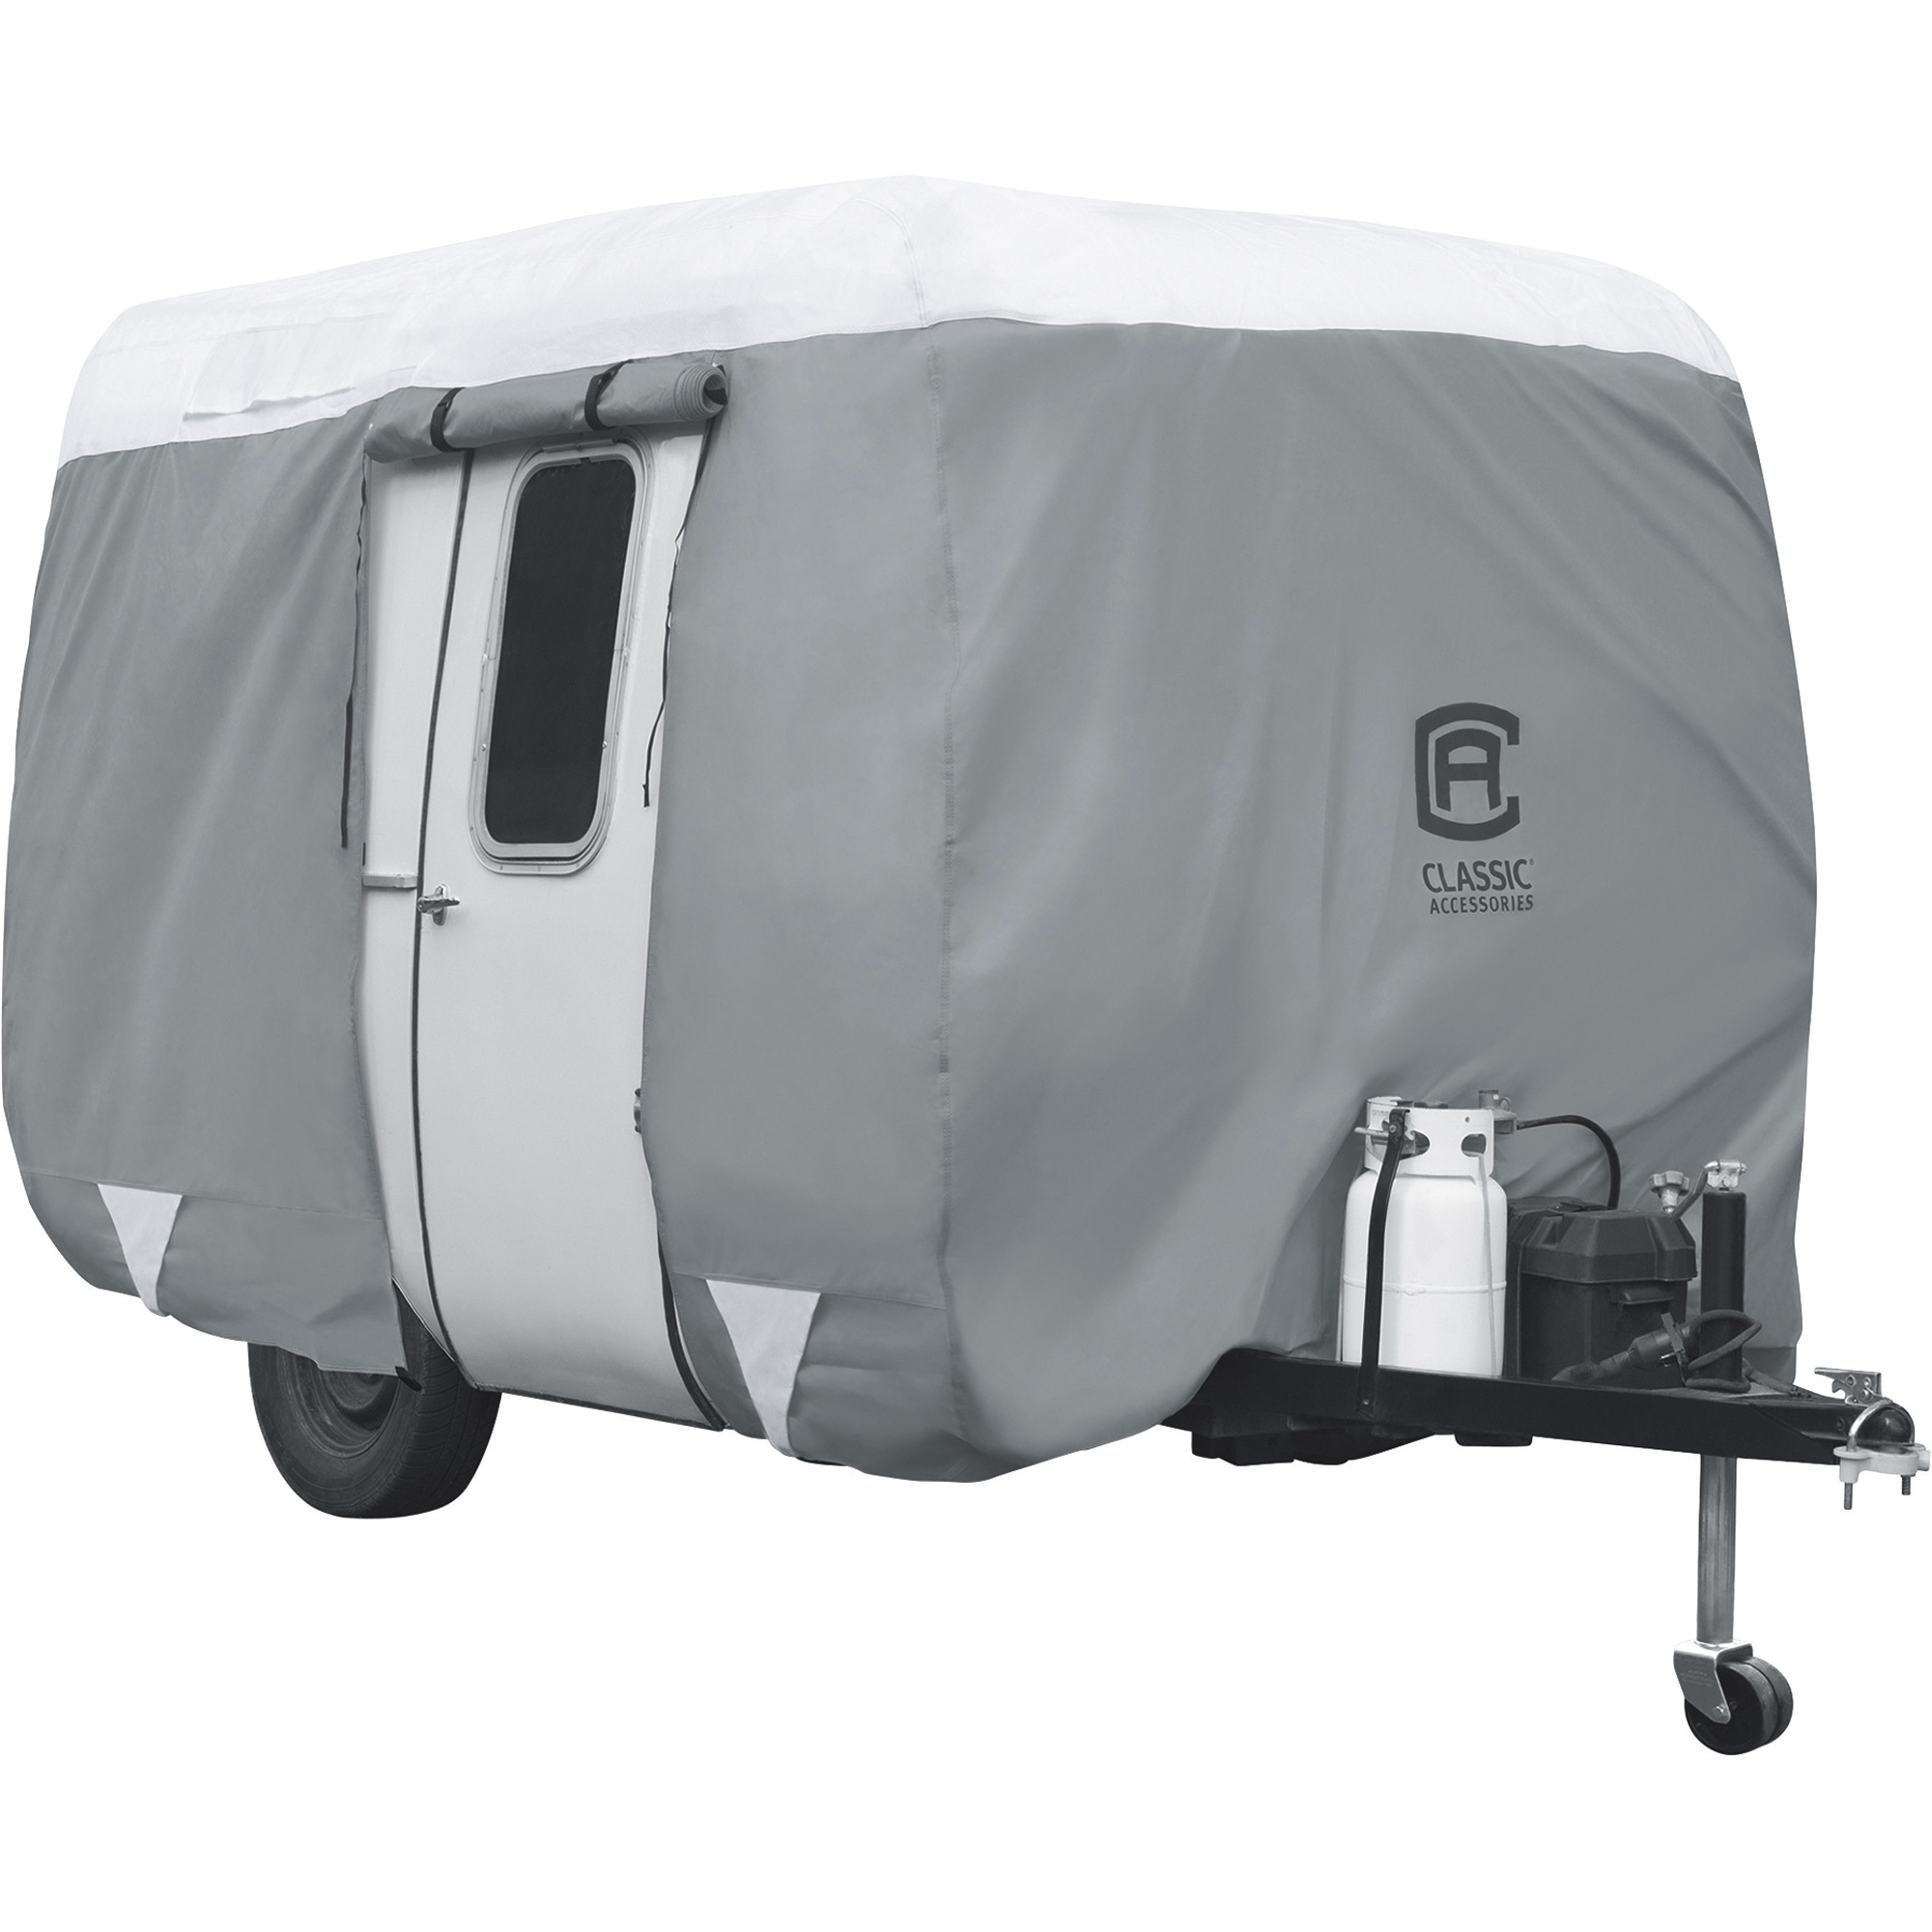 Classic Accessories OverDrive PolyPRO 3 Molded Fiberglass Travel Trailer Cover, Gray, Fits Molded Fiberglass Travel Trailers 13ft.1Inch L-16ft.L,